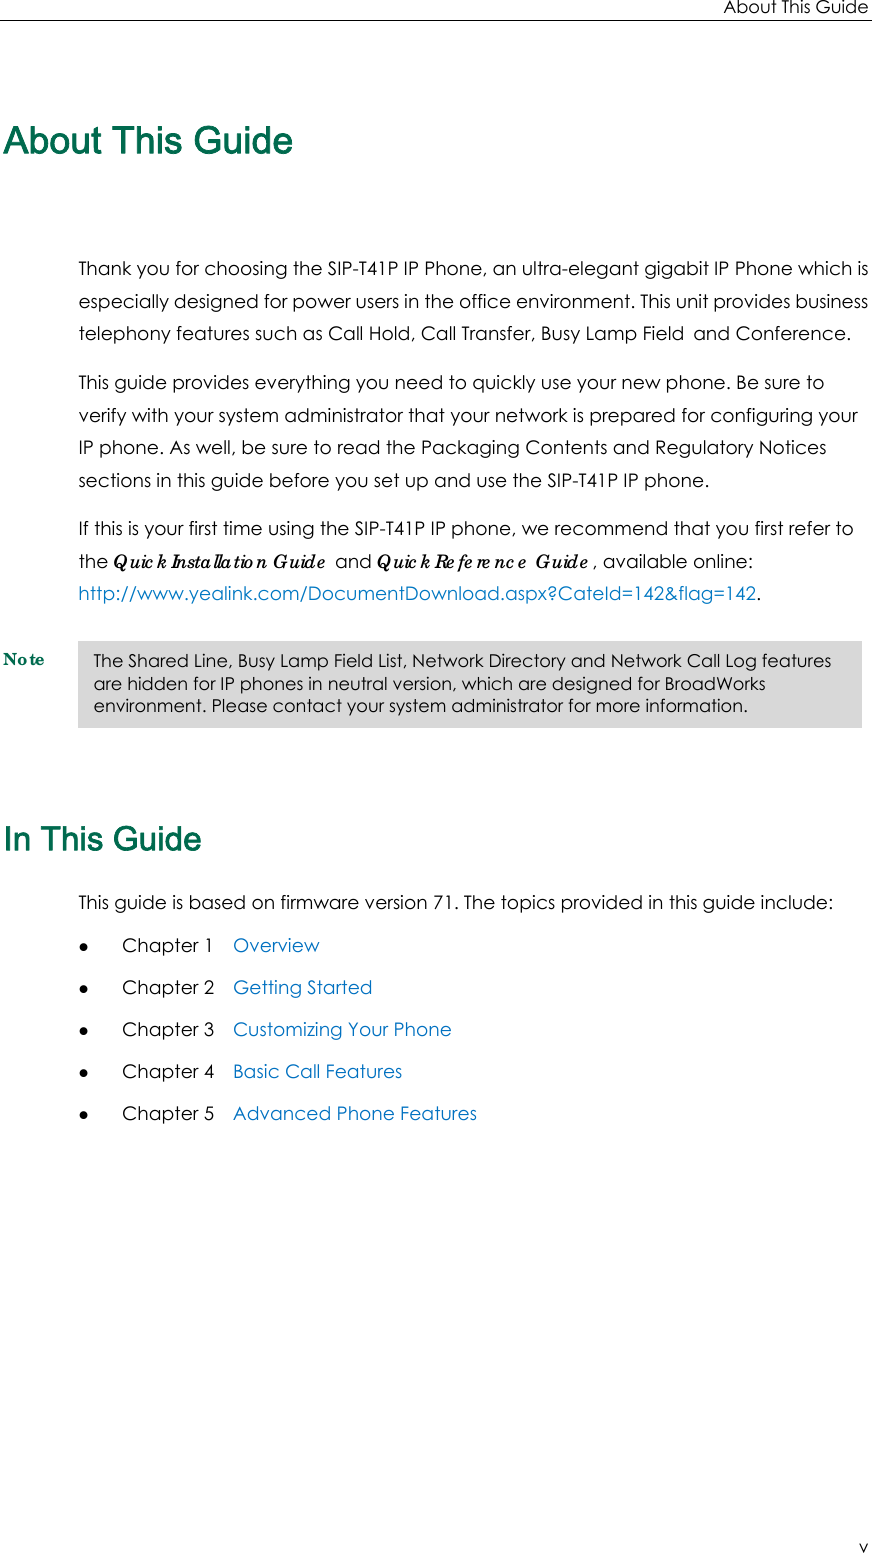 About This Guide v About This Guide Thank you for choosing the SIP-T41P IP Phone, an ultra-elegant gigabit IP Phone which is especially designed for power users in the office environment. This unit provides business telephony features such as Call Hold, Call Transfer, Busy Lamp Field and Conference. This guide provides everything you need to quickly use your new phone. Be sure to verify with your system administrator that your network is prepared for configuring your IP phone. As well, be sure to read the Packaging Contents and Regulatory Notices sections in this guide before you set up and use the SIP-T41P IP phone. If this is your first time using the SIP-T41P IP phone, we recommend that you first refer to the Quick Installation Guide and Quick Reference Guide, available online: http://www.yealink.com/DocumentDownload.aspx?CateId=142&amp;flag=142. Note In This Guide This guide is based on firmware version 71. The topics provided in this guide include: z Chapter 1    Overview z Chapter 2    Getting Started z Chapter 3    Customizing Your Phone z Chapter 4    Basic Call Features z Chapter 5    Advanced Phone Features The Shared Line, Busy Lamp Field List, Network Directory and Network Call Log features are hidden for IP phones in neutral version, which are designed for BroadWorks environment. Please contact your system administrator for more information. 